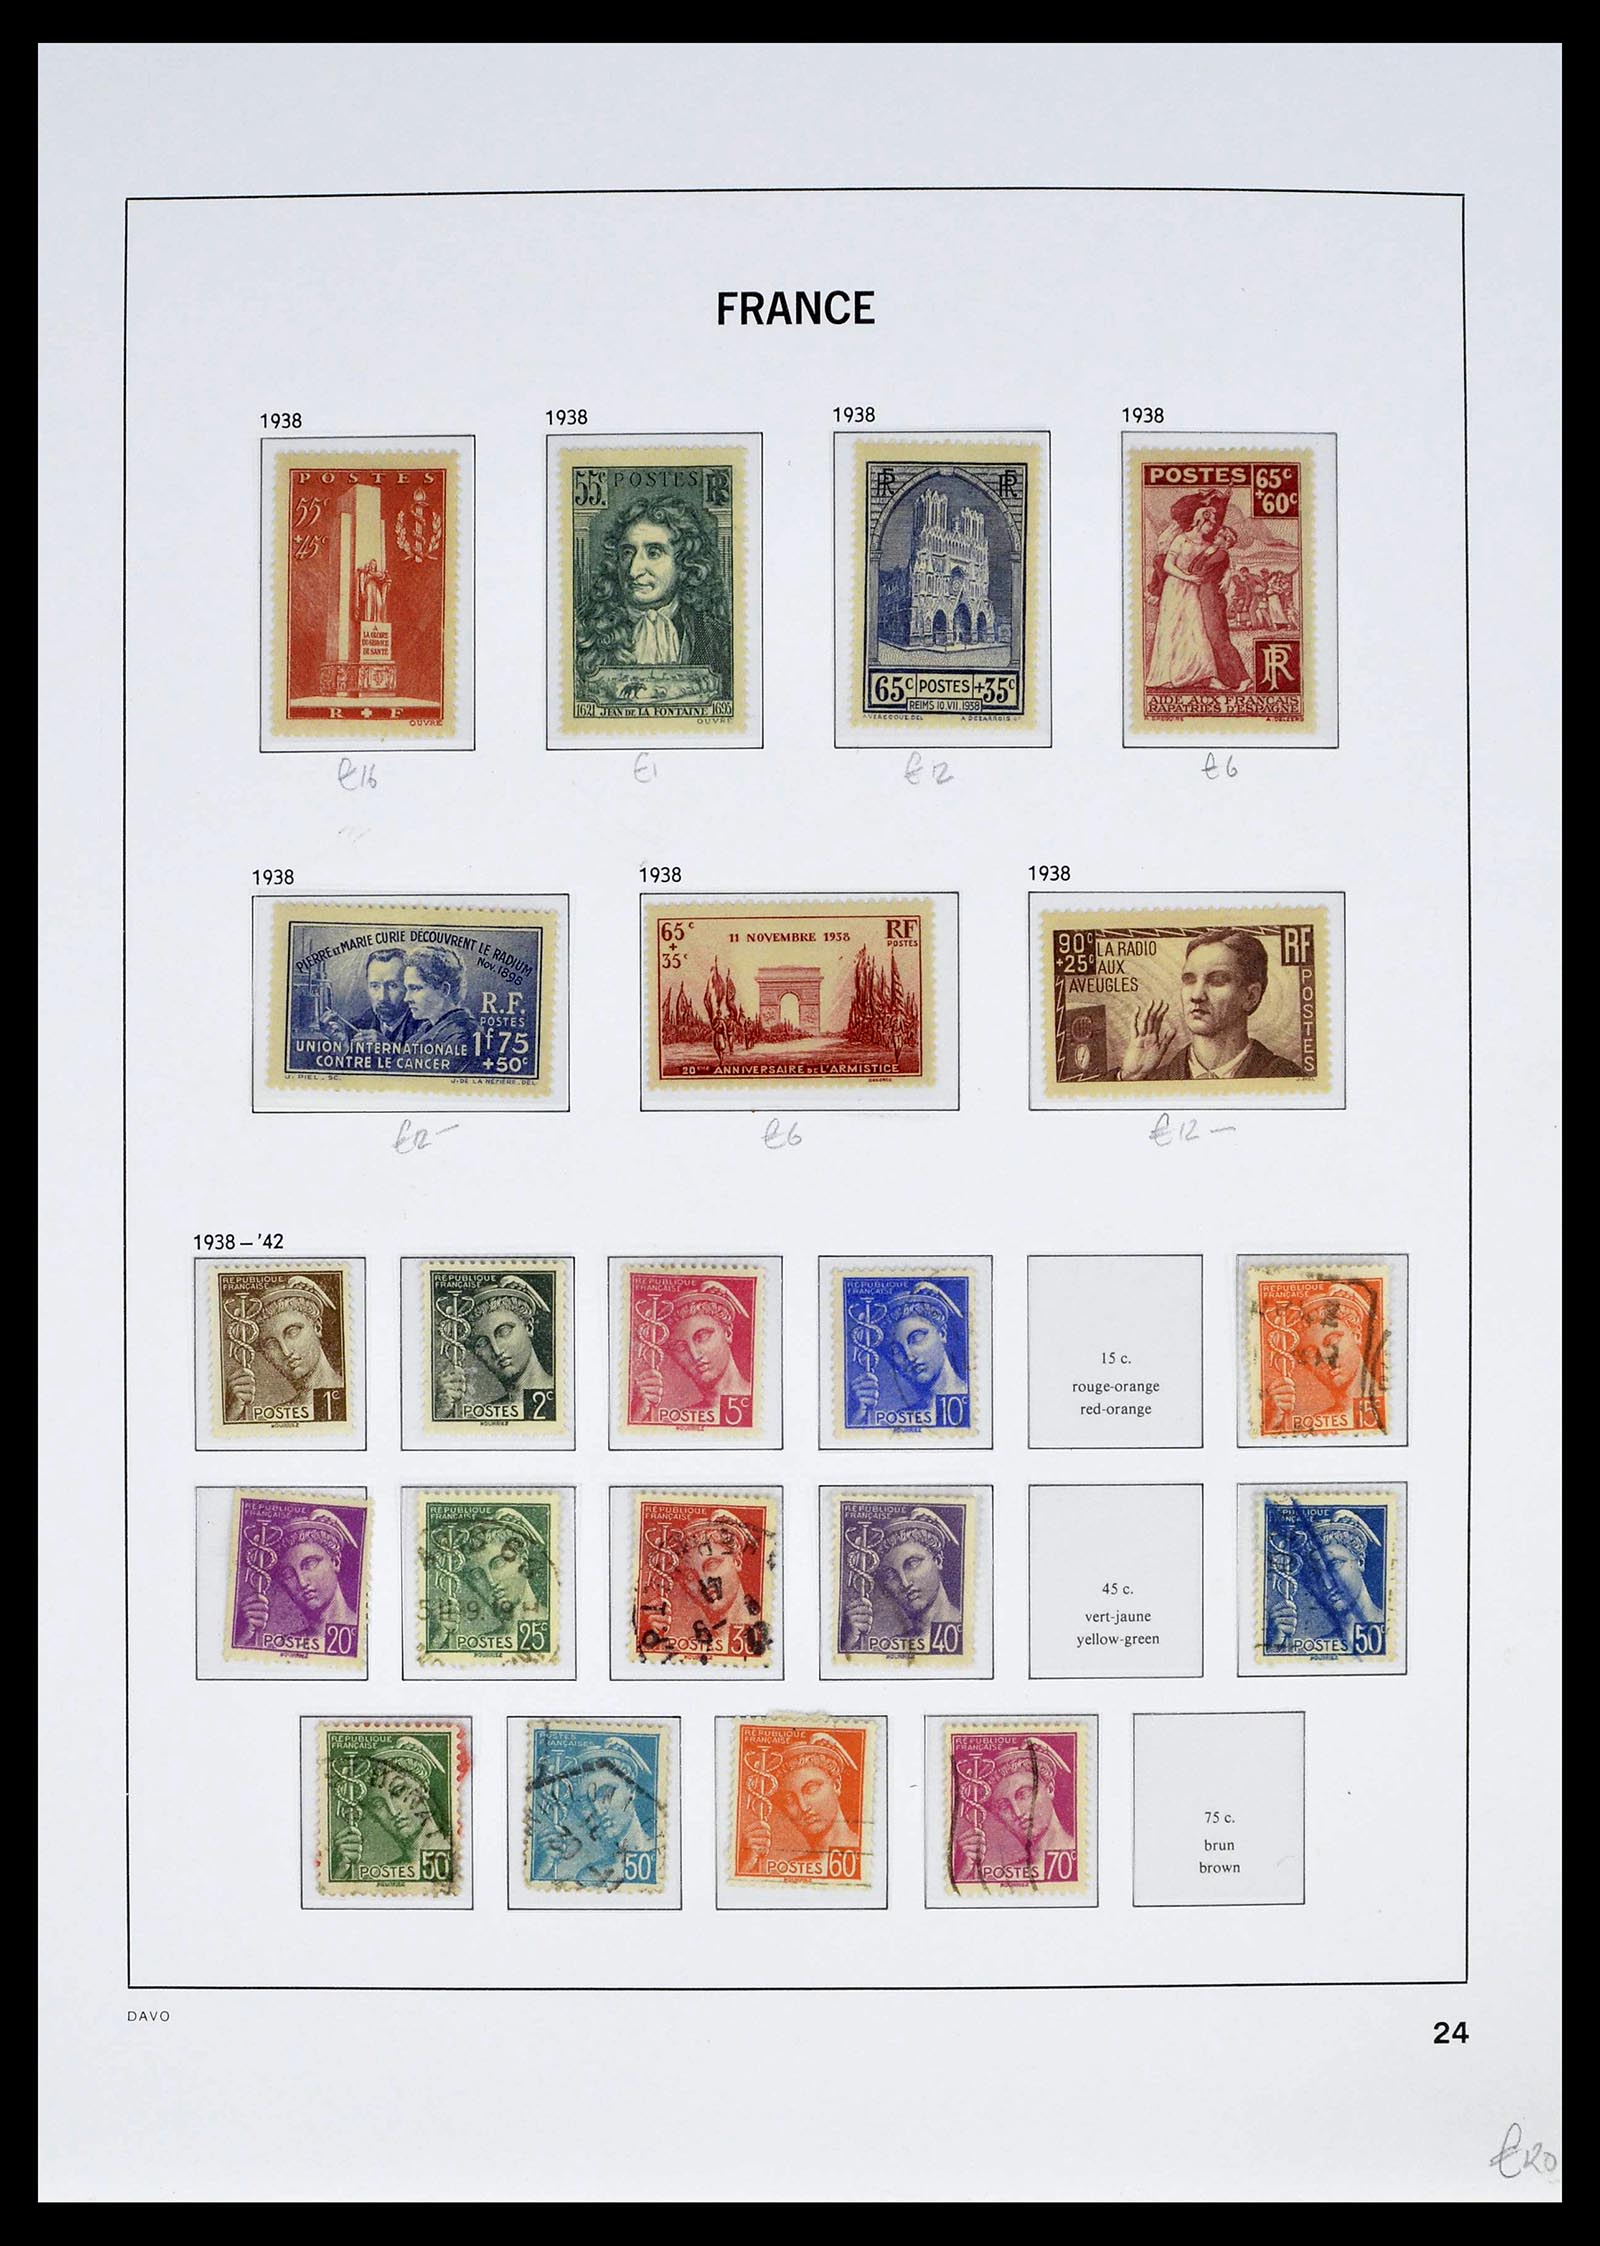 39335 0039 - Stamp collection 39335 France 1849-1969.